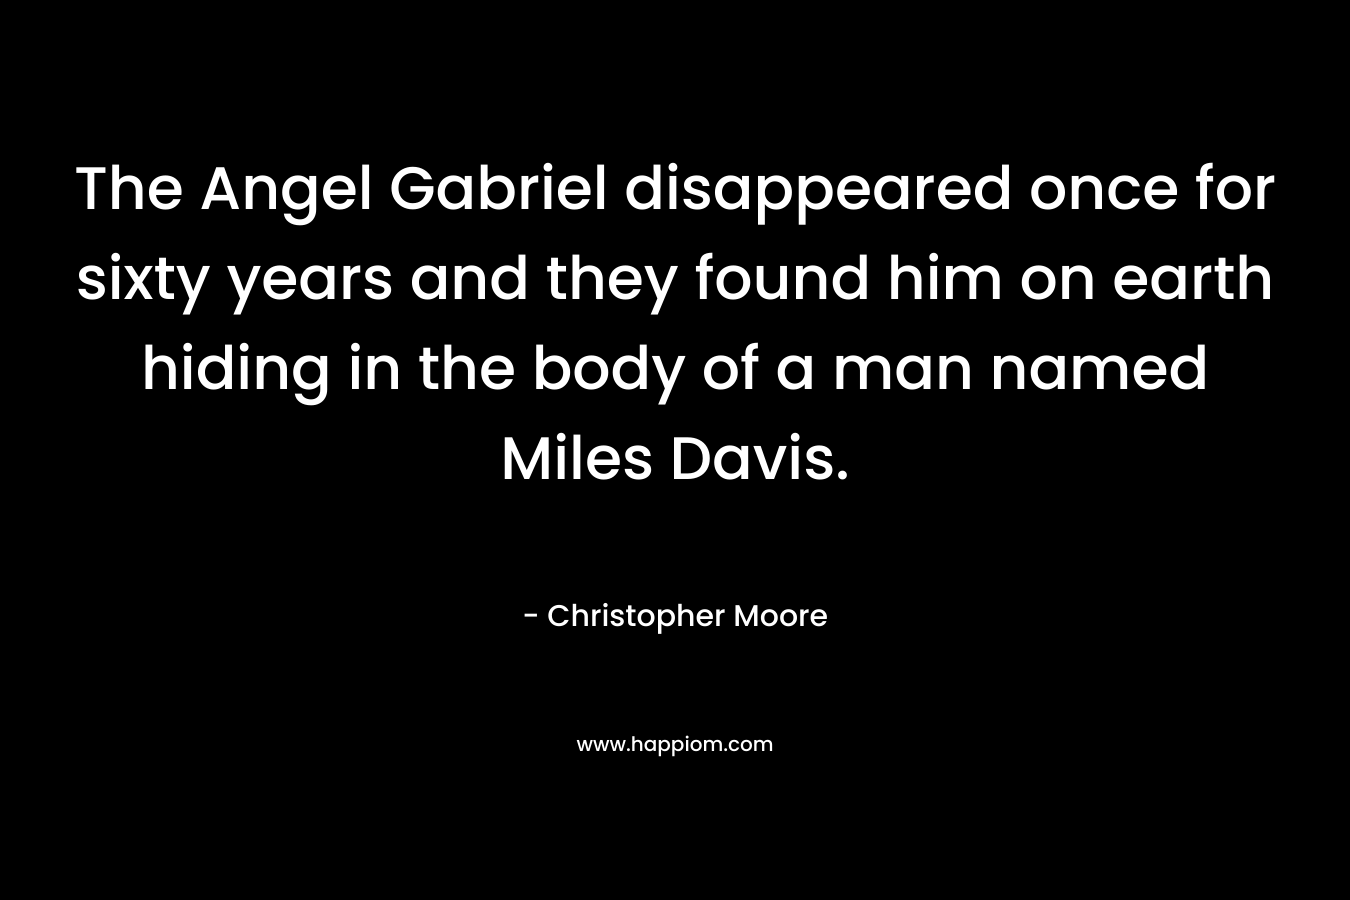 The Angel Gabriel disappeared once for sixty years and they found him on earth hiding in the body of a man named Miles Davis. – Christopher Moore